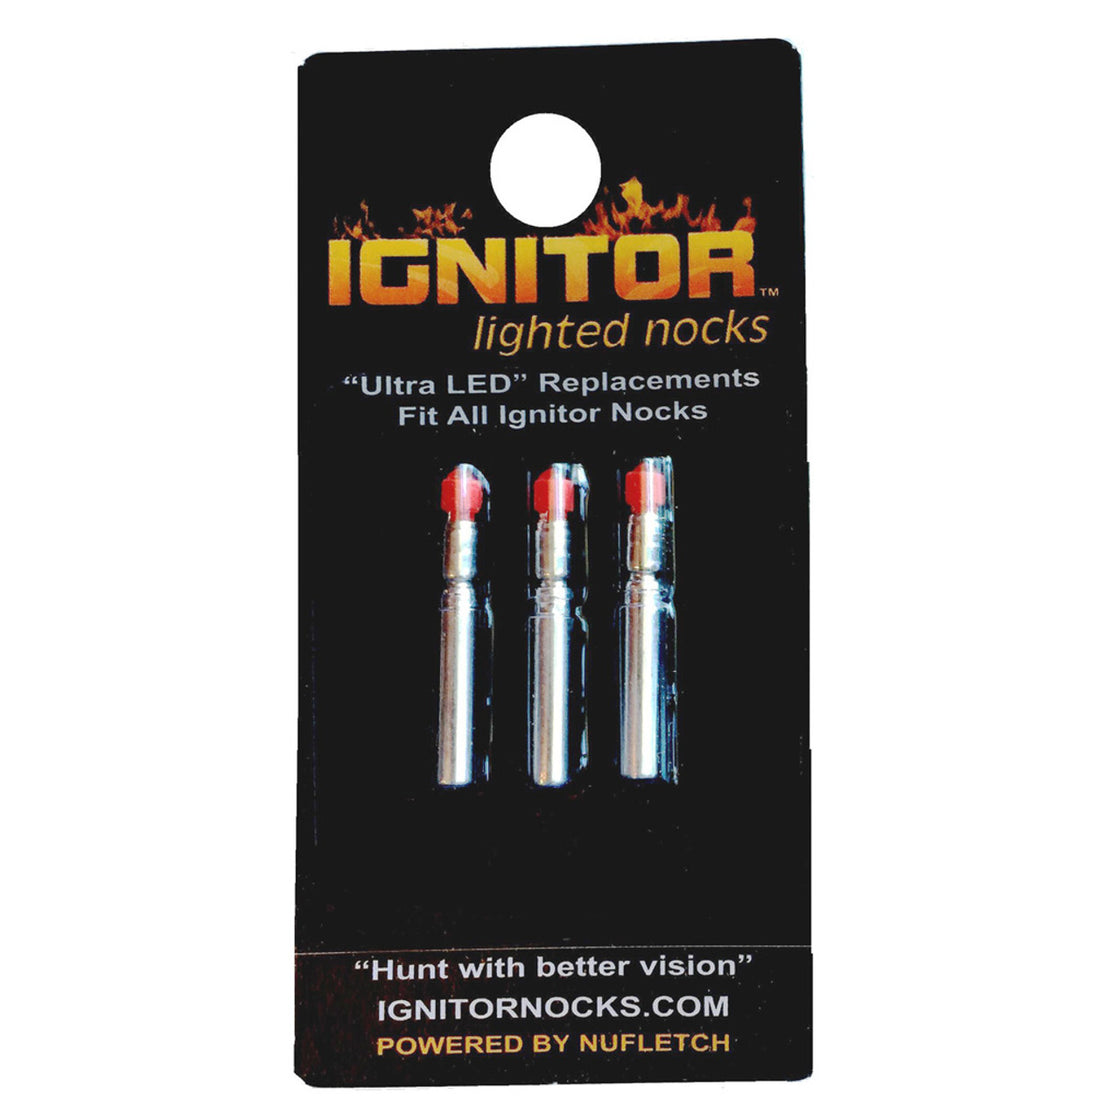 NuFletch Ignitor Lighted Nock Replacement Bulbs